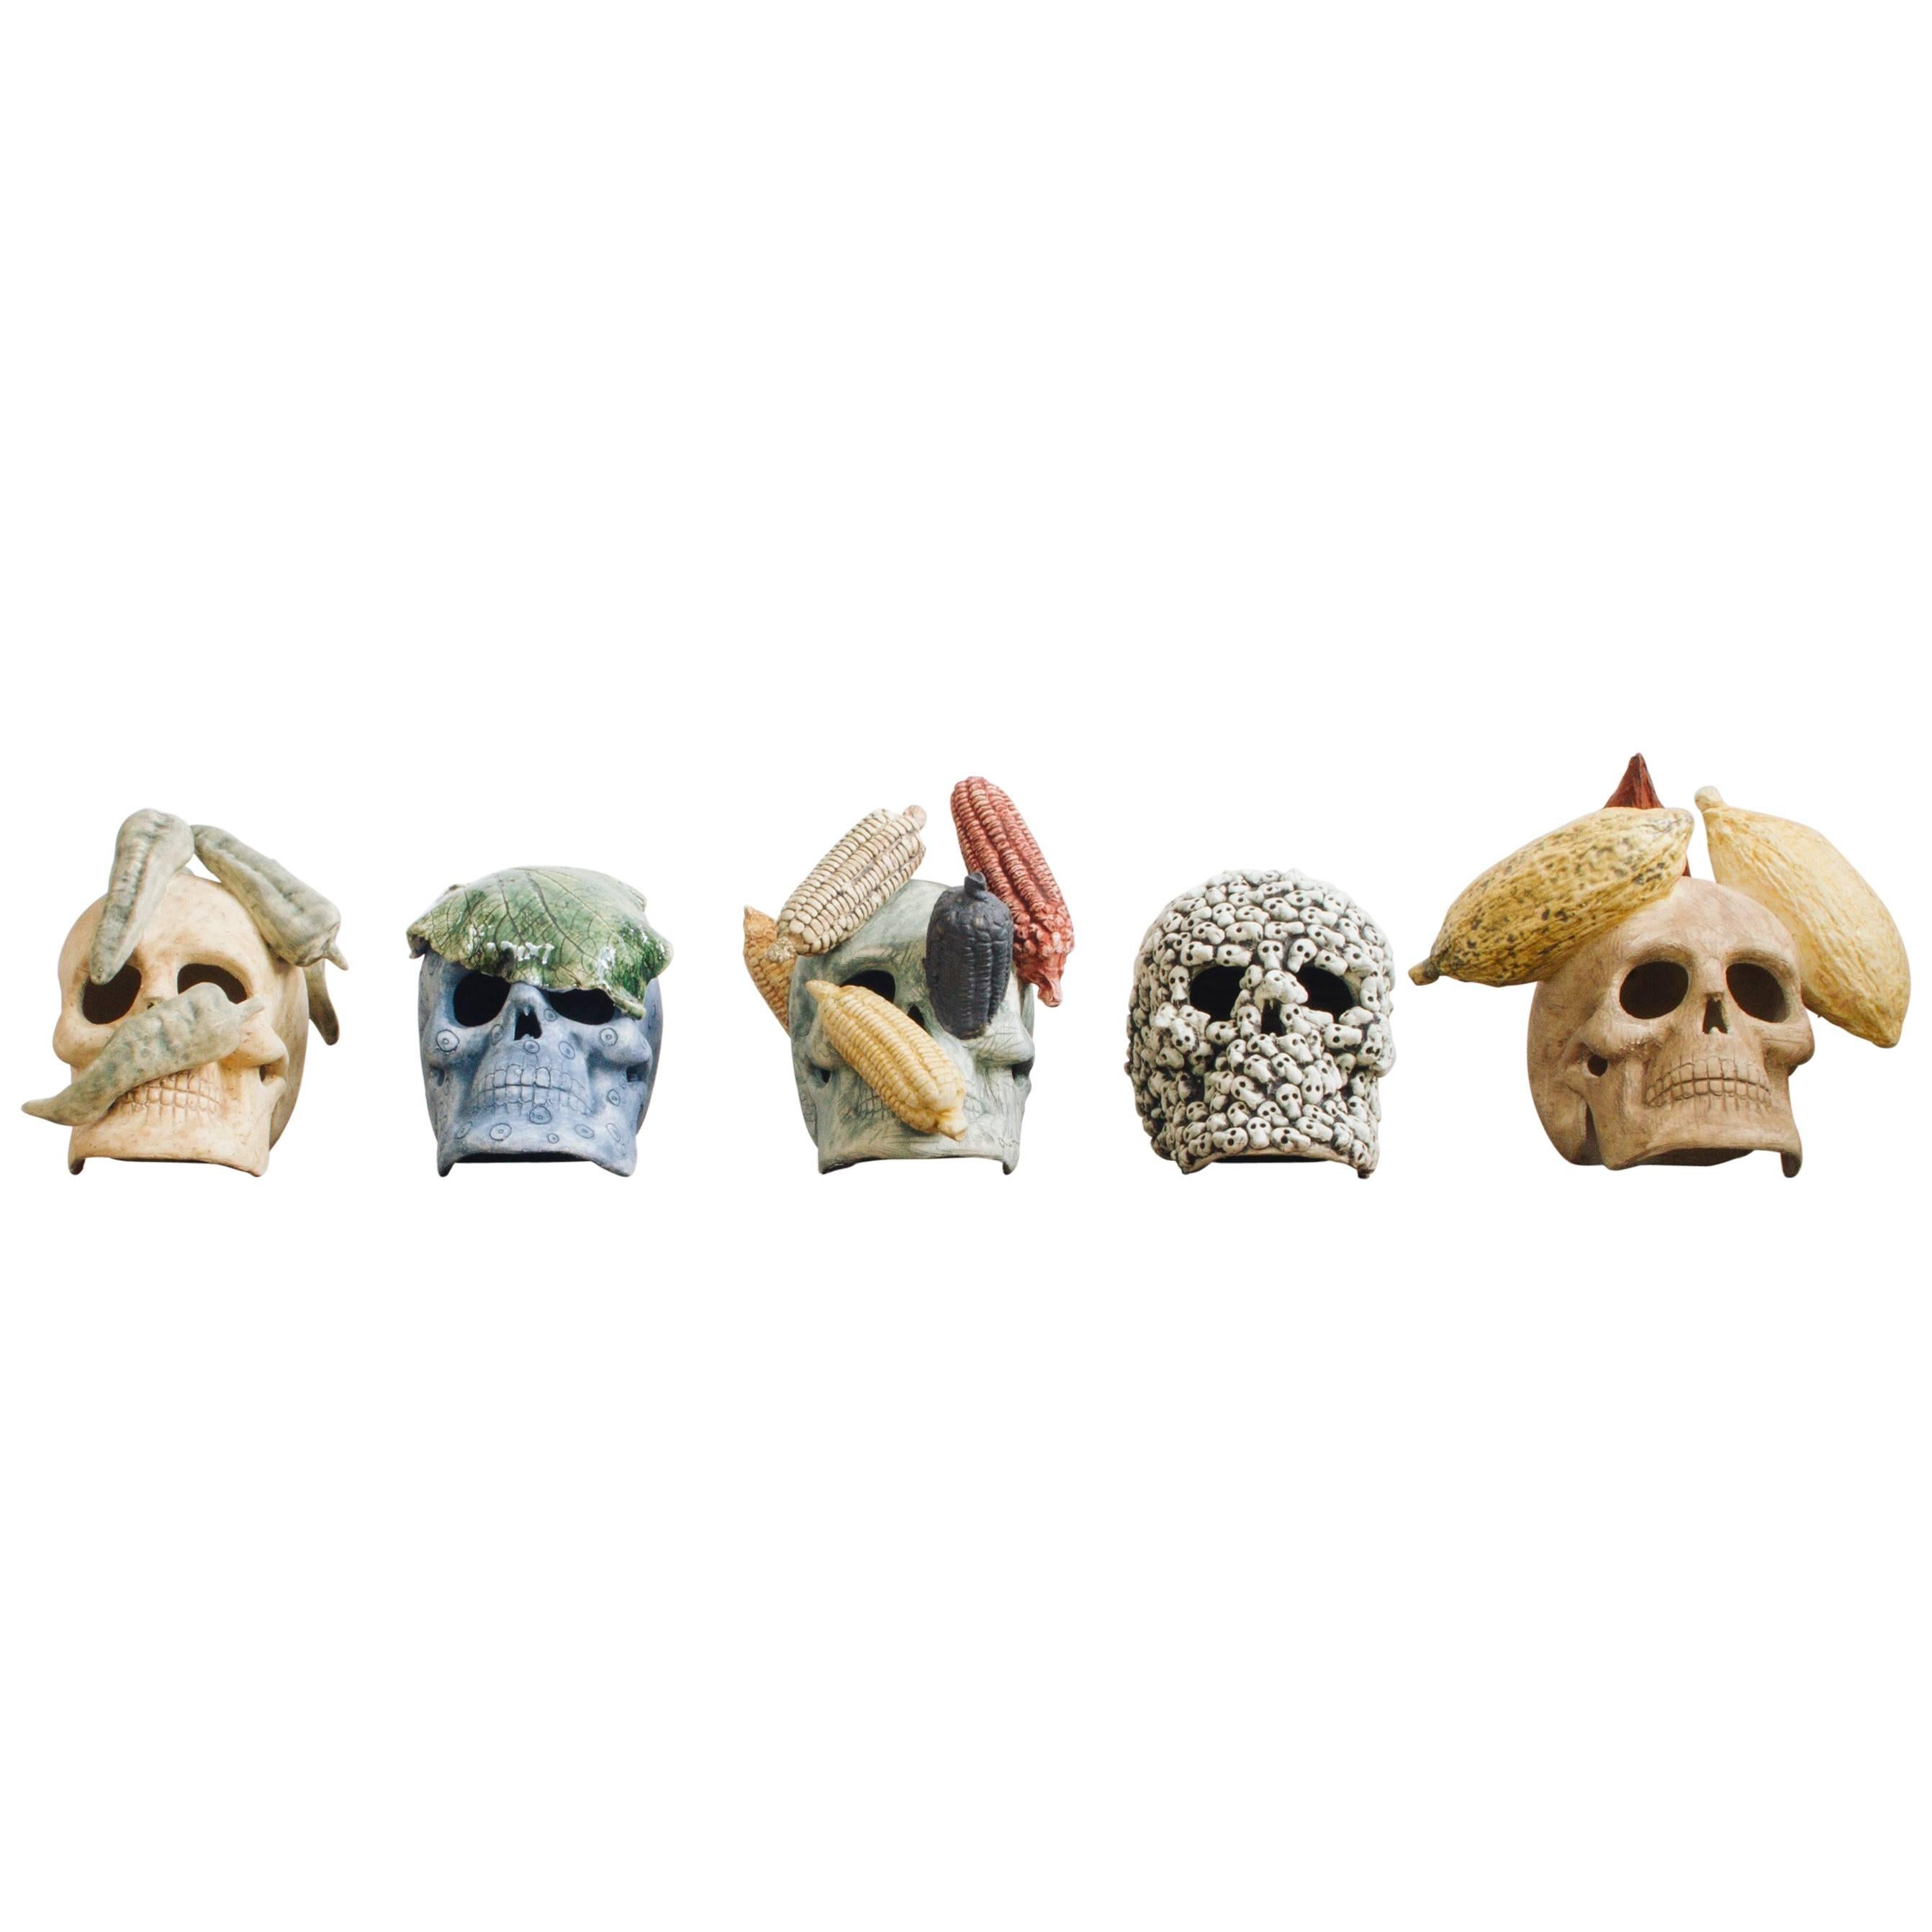 Mexican Handmade Ceramic Skull Sculpture Collection Made in Limited Editions